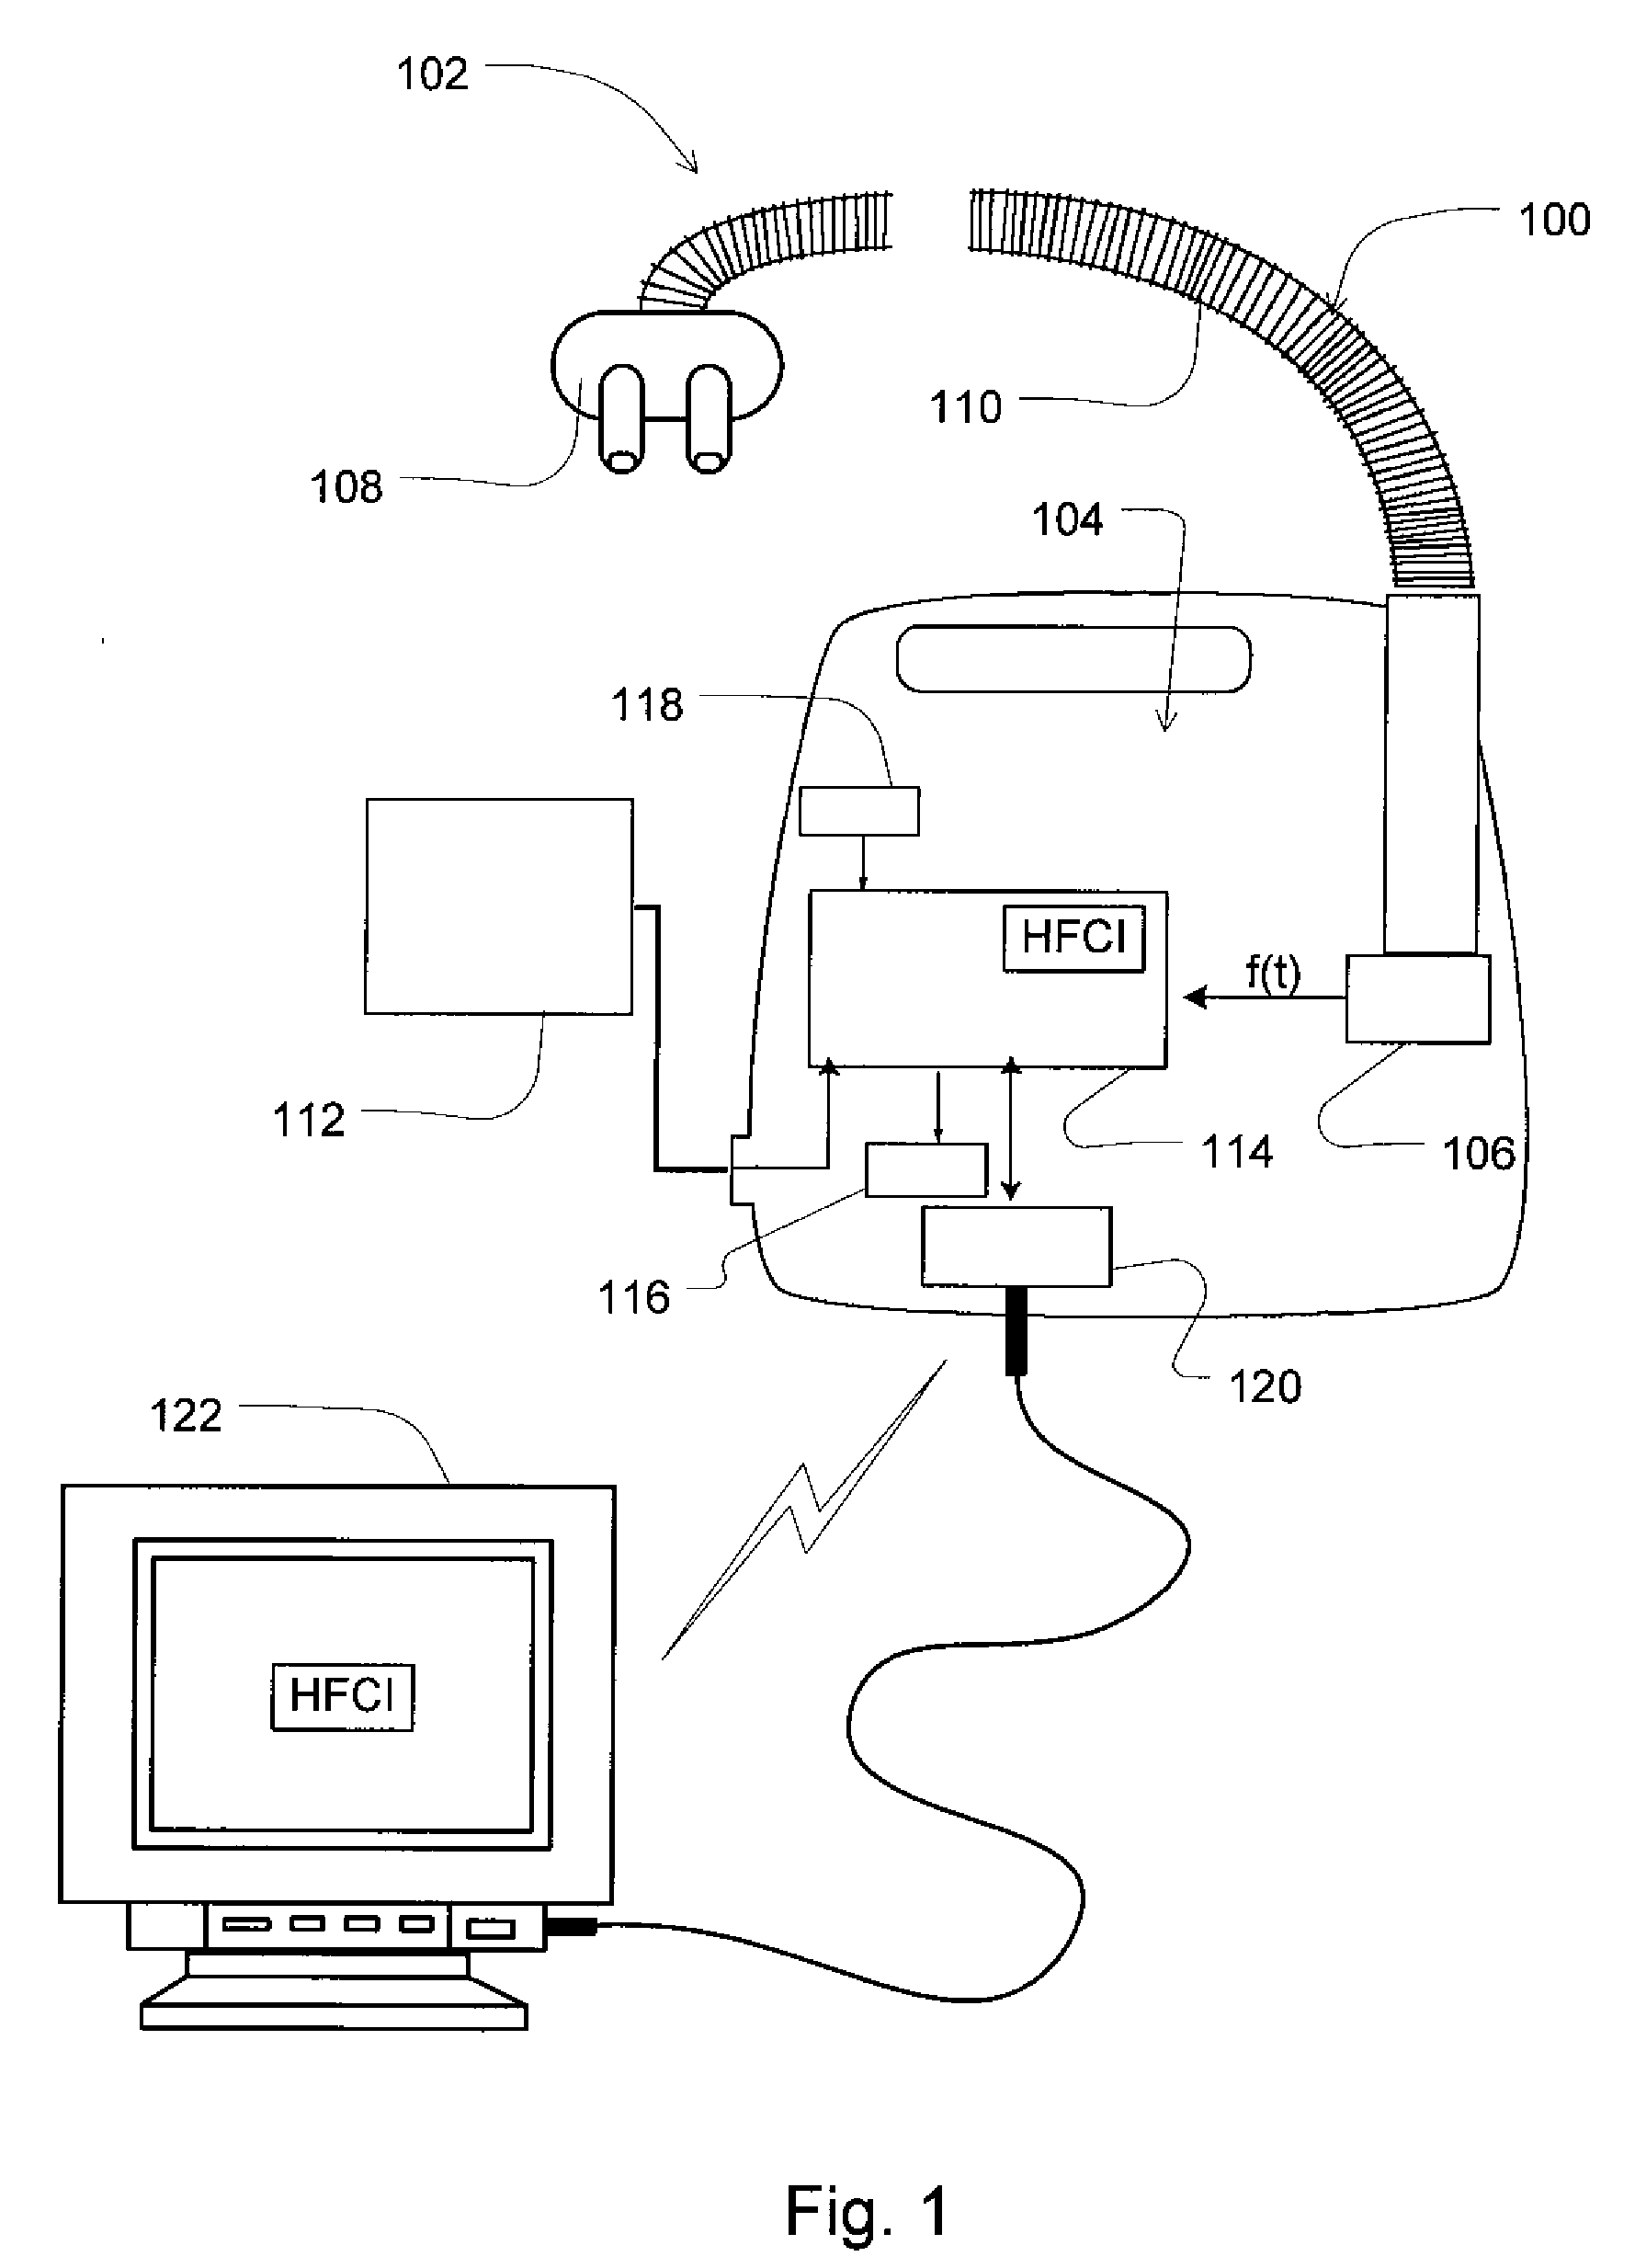 Method and apparatus for detecting and treating heart failure